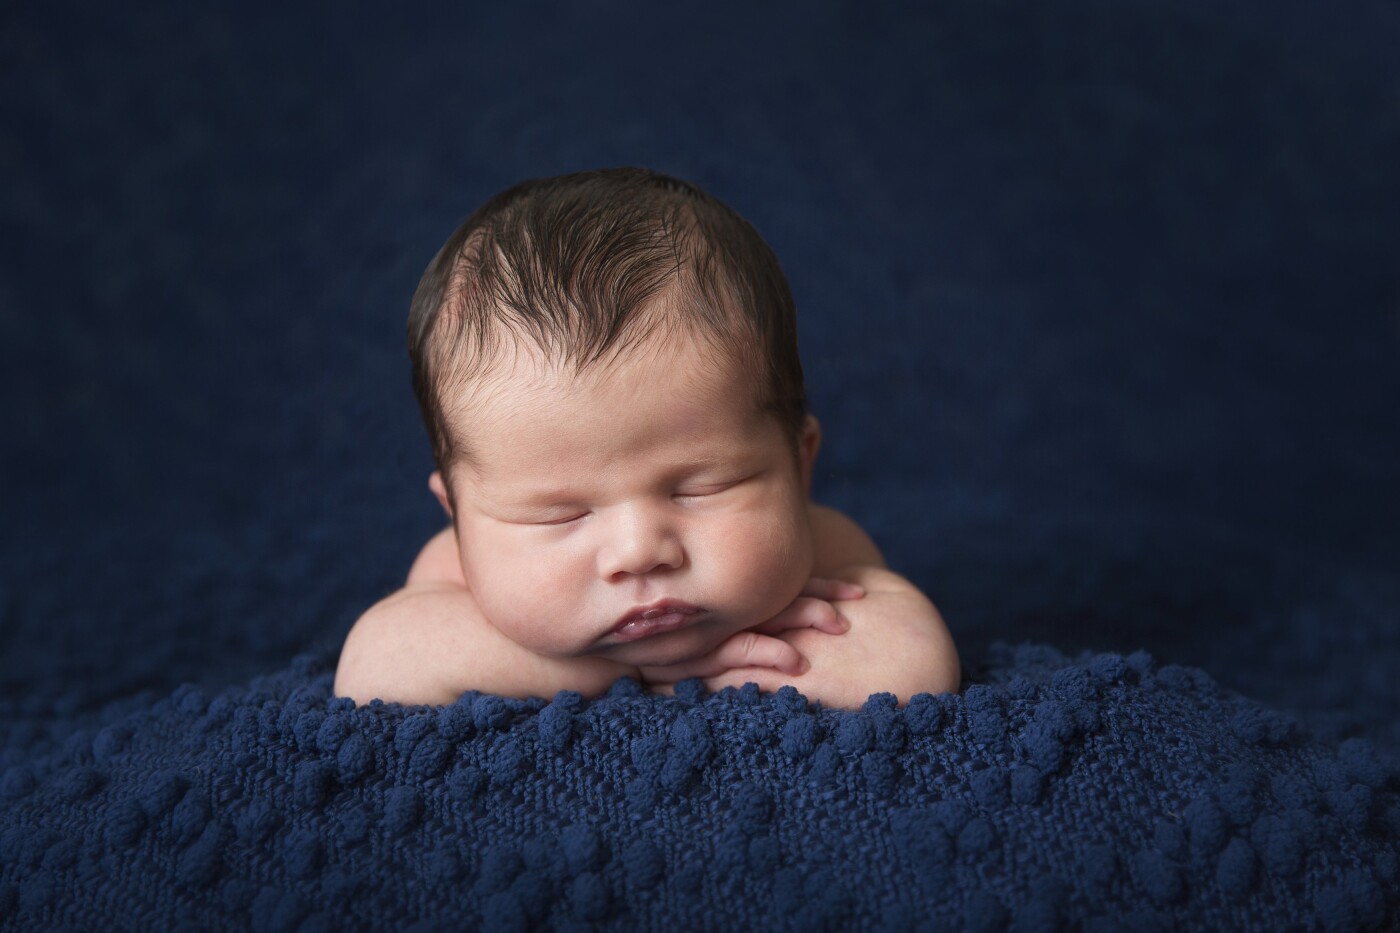 Baby Julian at 10 days old slept through the entire session. I love how the dark blue blanket surrounds his tiny little face. Don't you just want to squeeze those cheeks? 